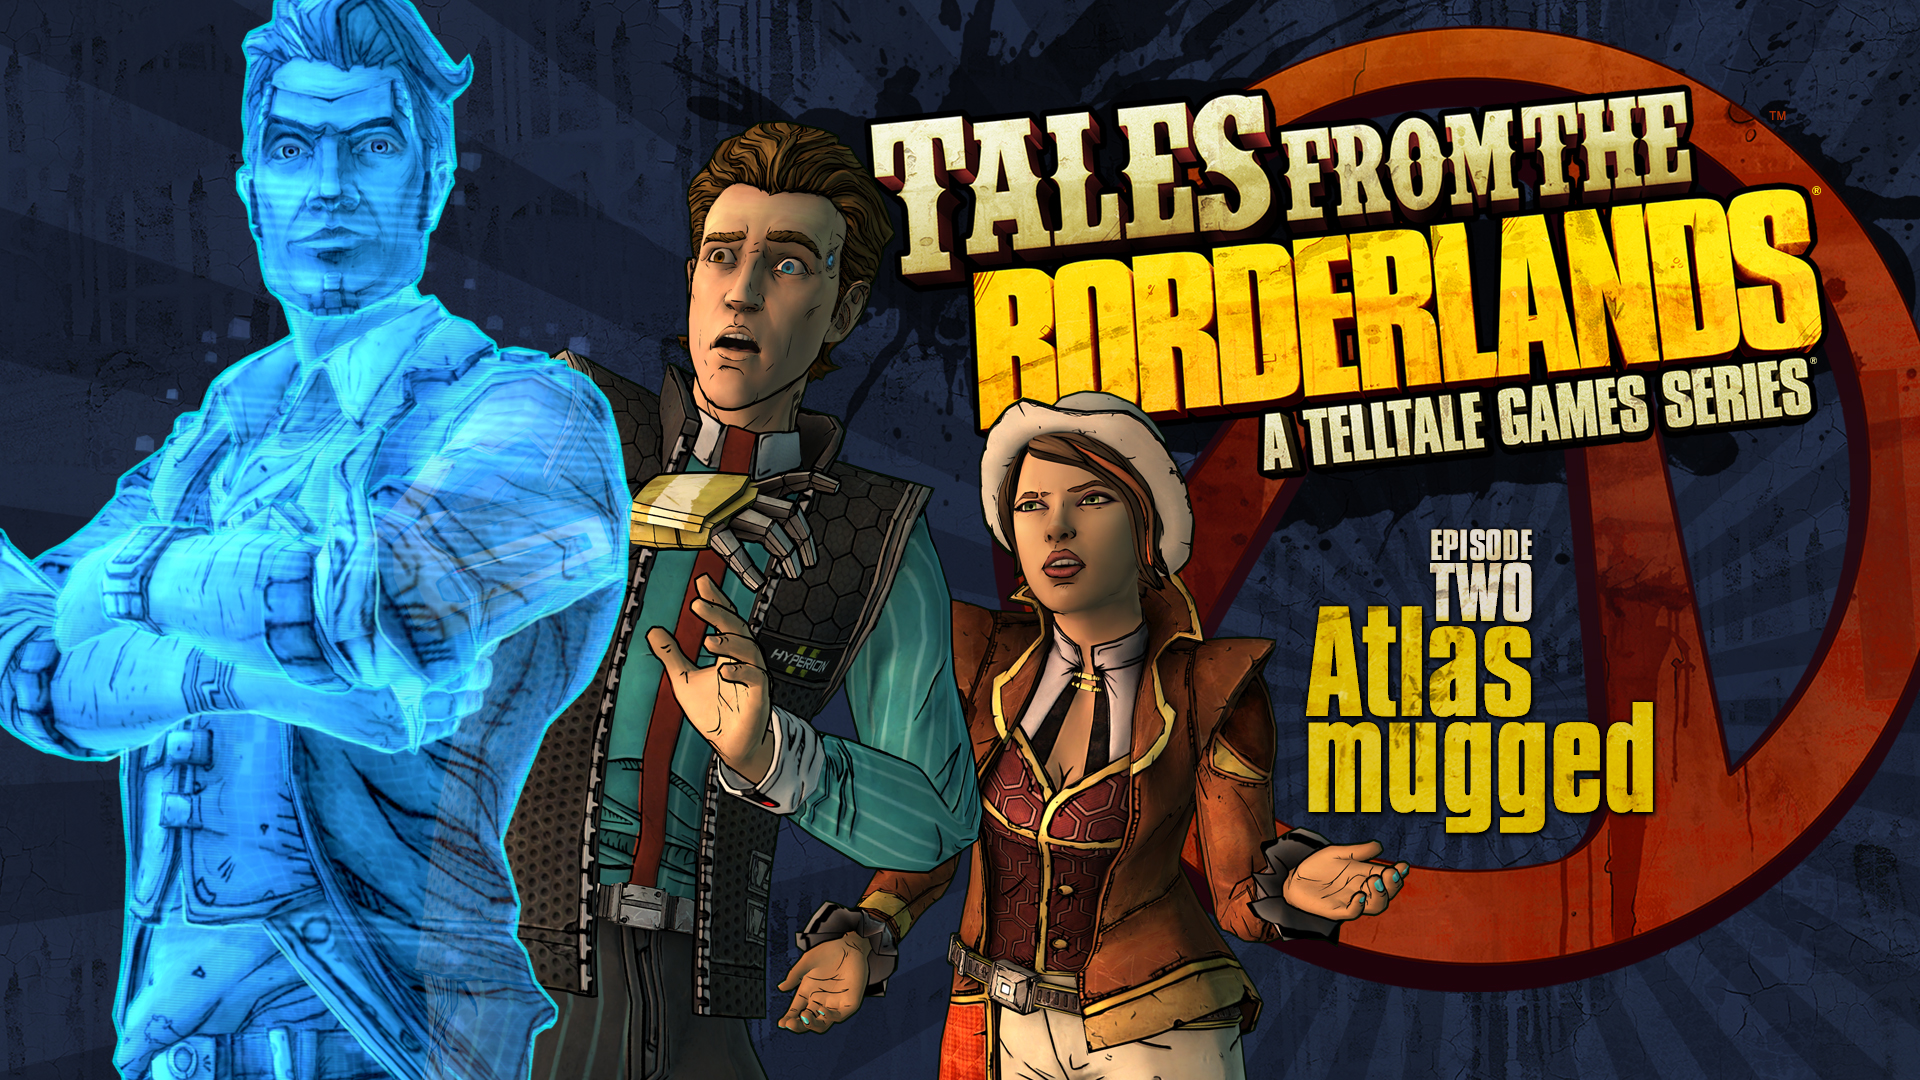 tales from the borderlands wallpaper,movie,fictional character,fiction,poster,comics